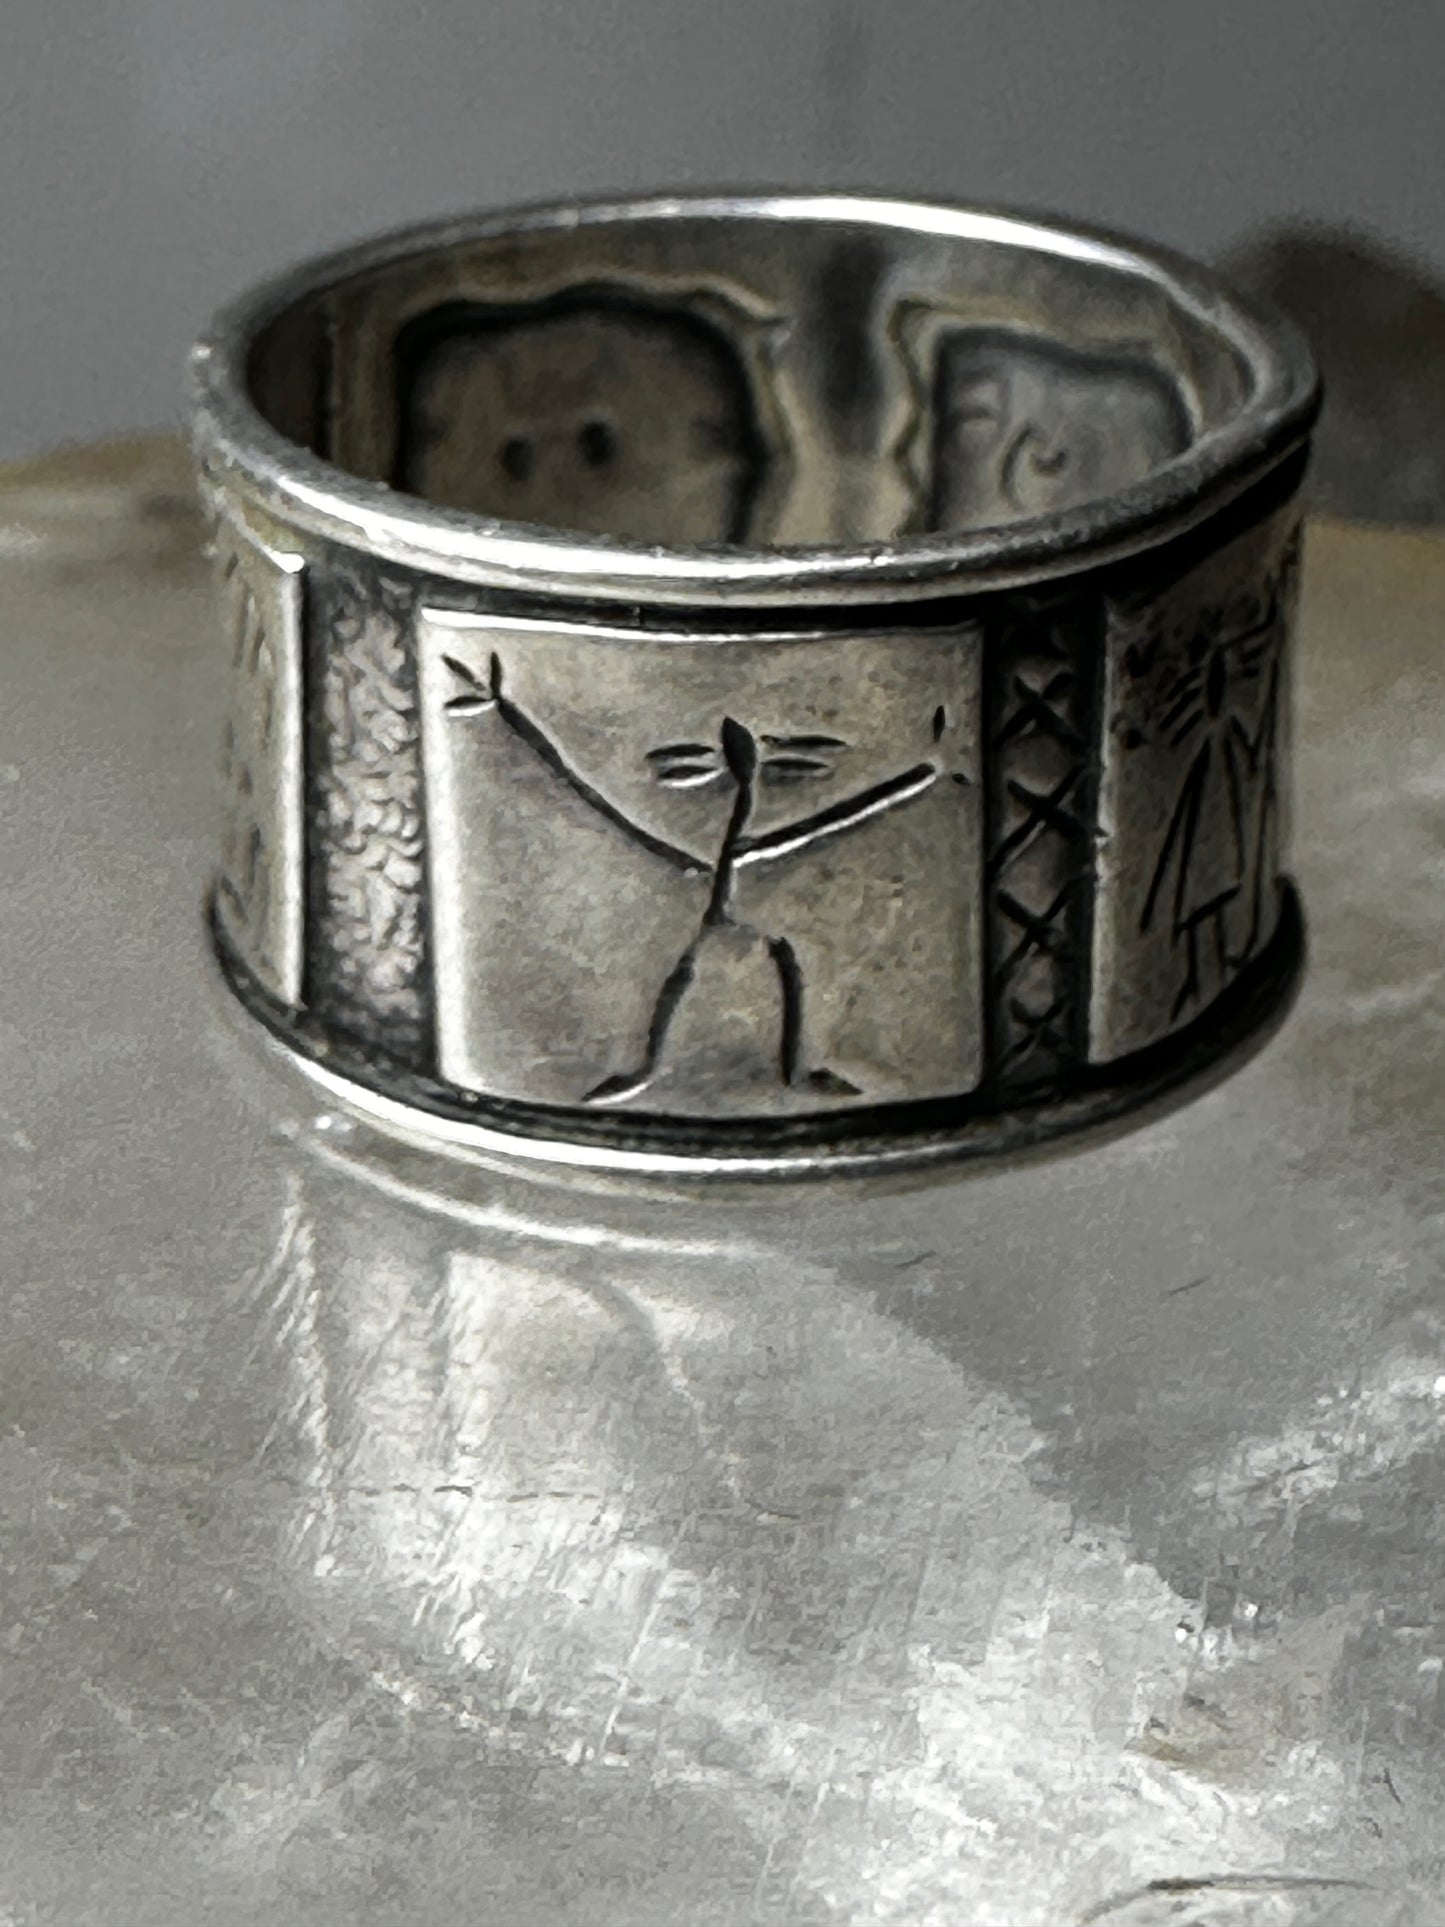 Figurative ring stick figures trees love happiness band size 7.50 sterling silver women